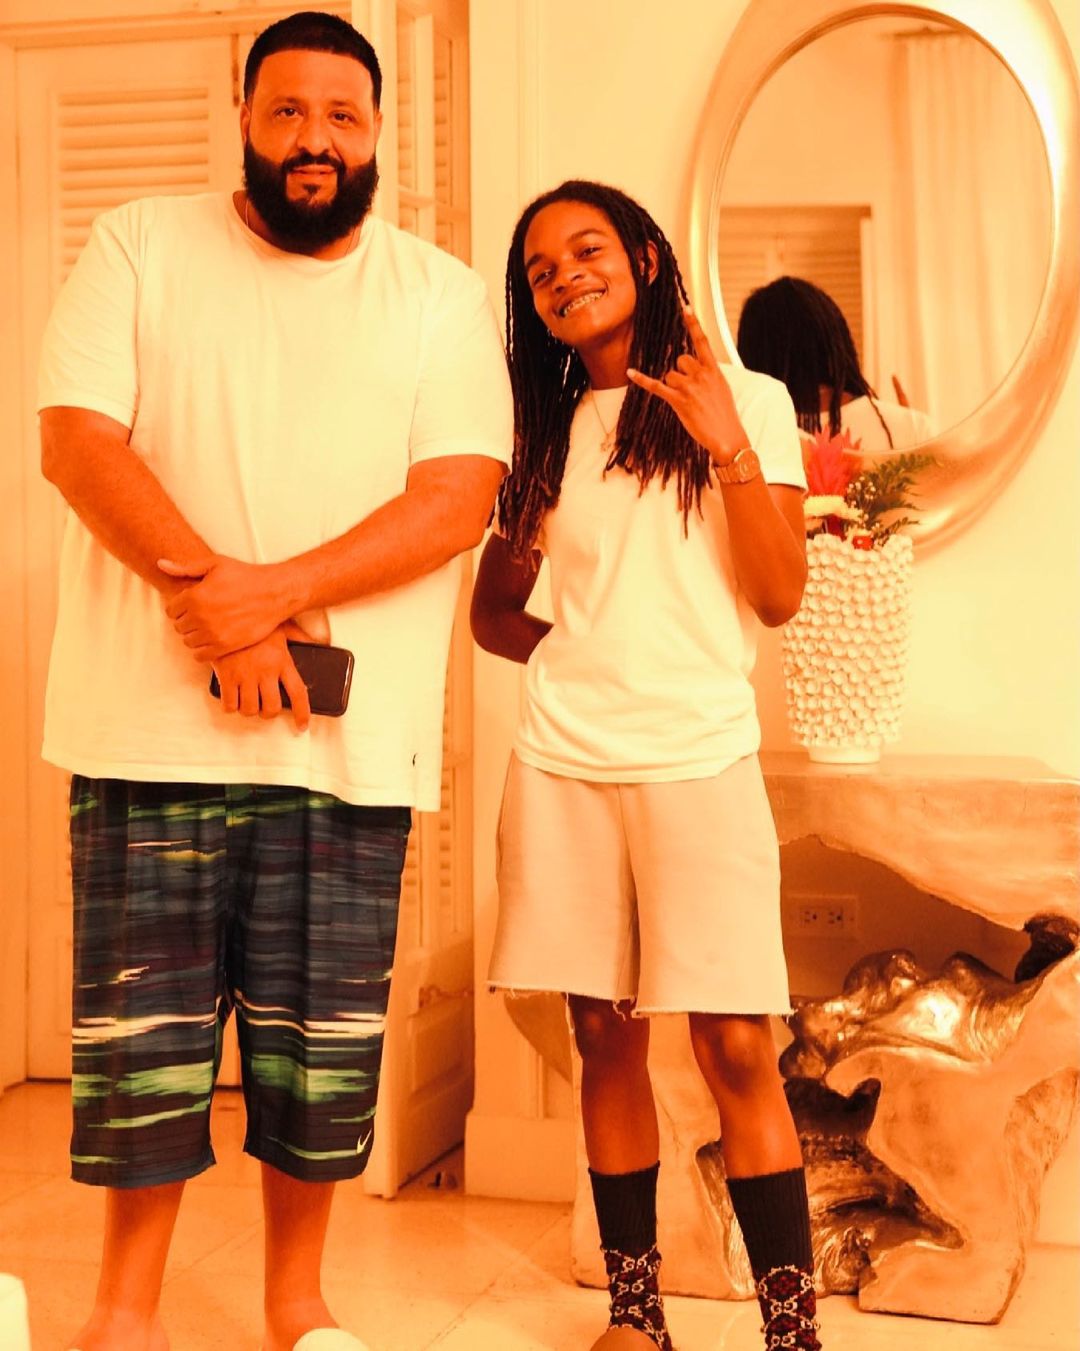 DJ Khaled New Album Line-Up Features Koffee Capelton Buju Banton and Other Stars